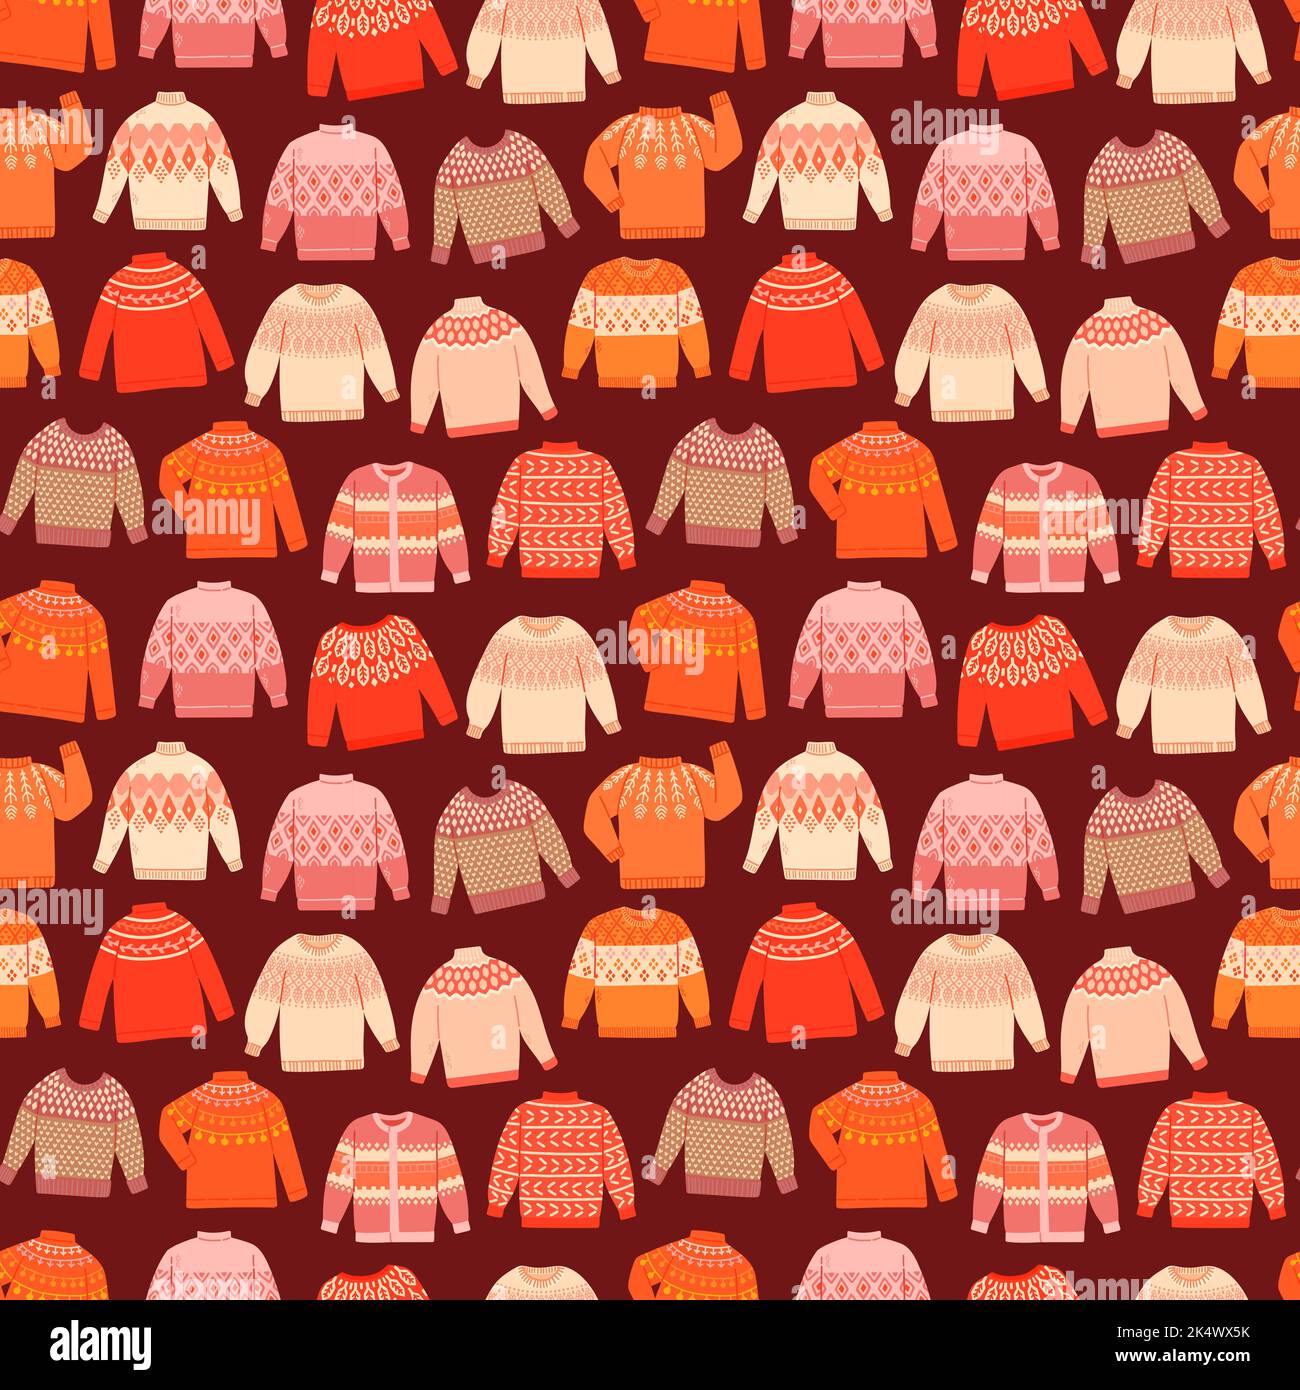 Winter sweaters wool knit seamless pattern vector Stock Vector